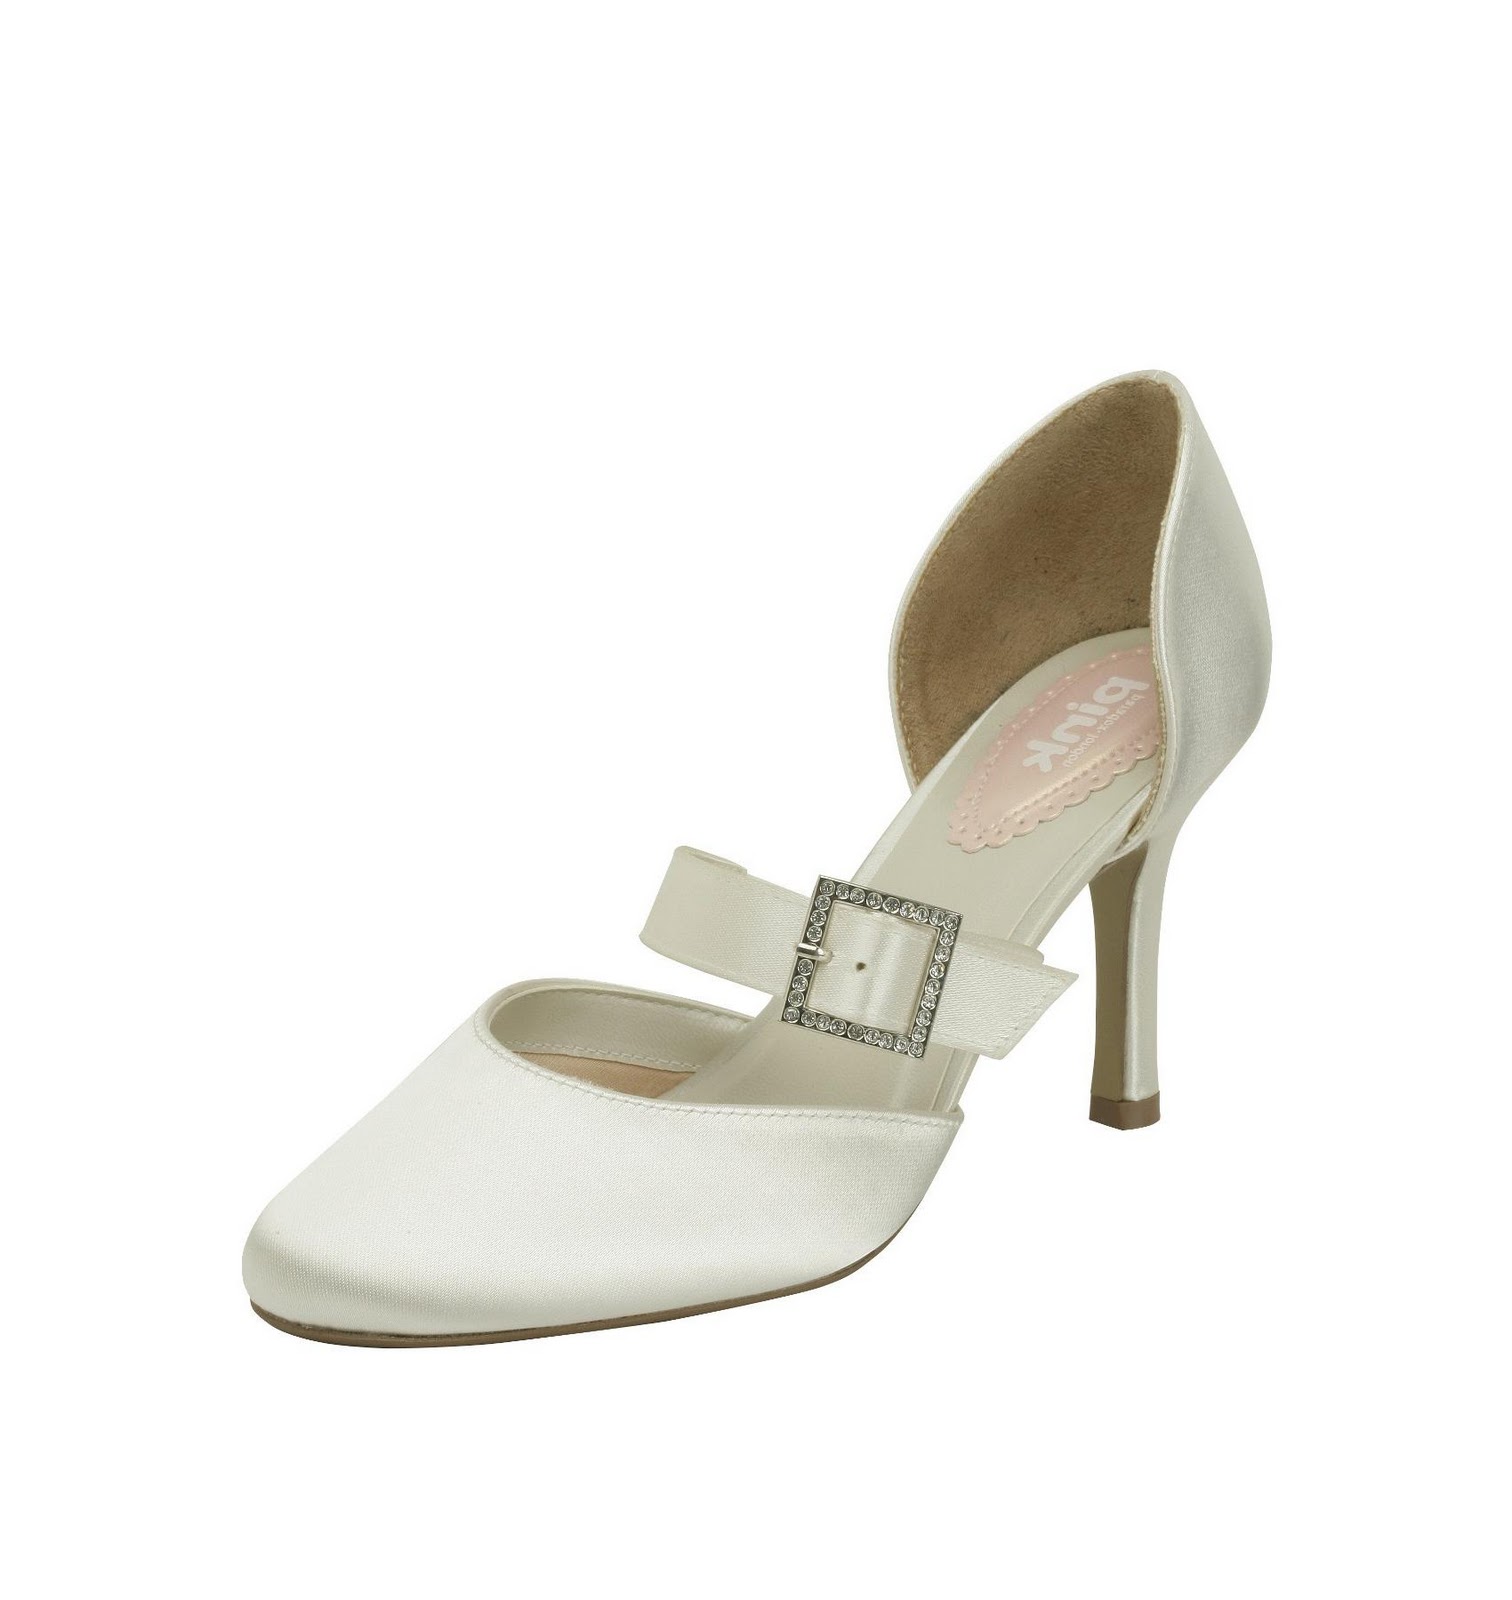 Paradox Pink Damson Fully Closed Wedding Shoes. Hover over image to zoom